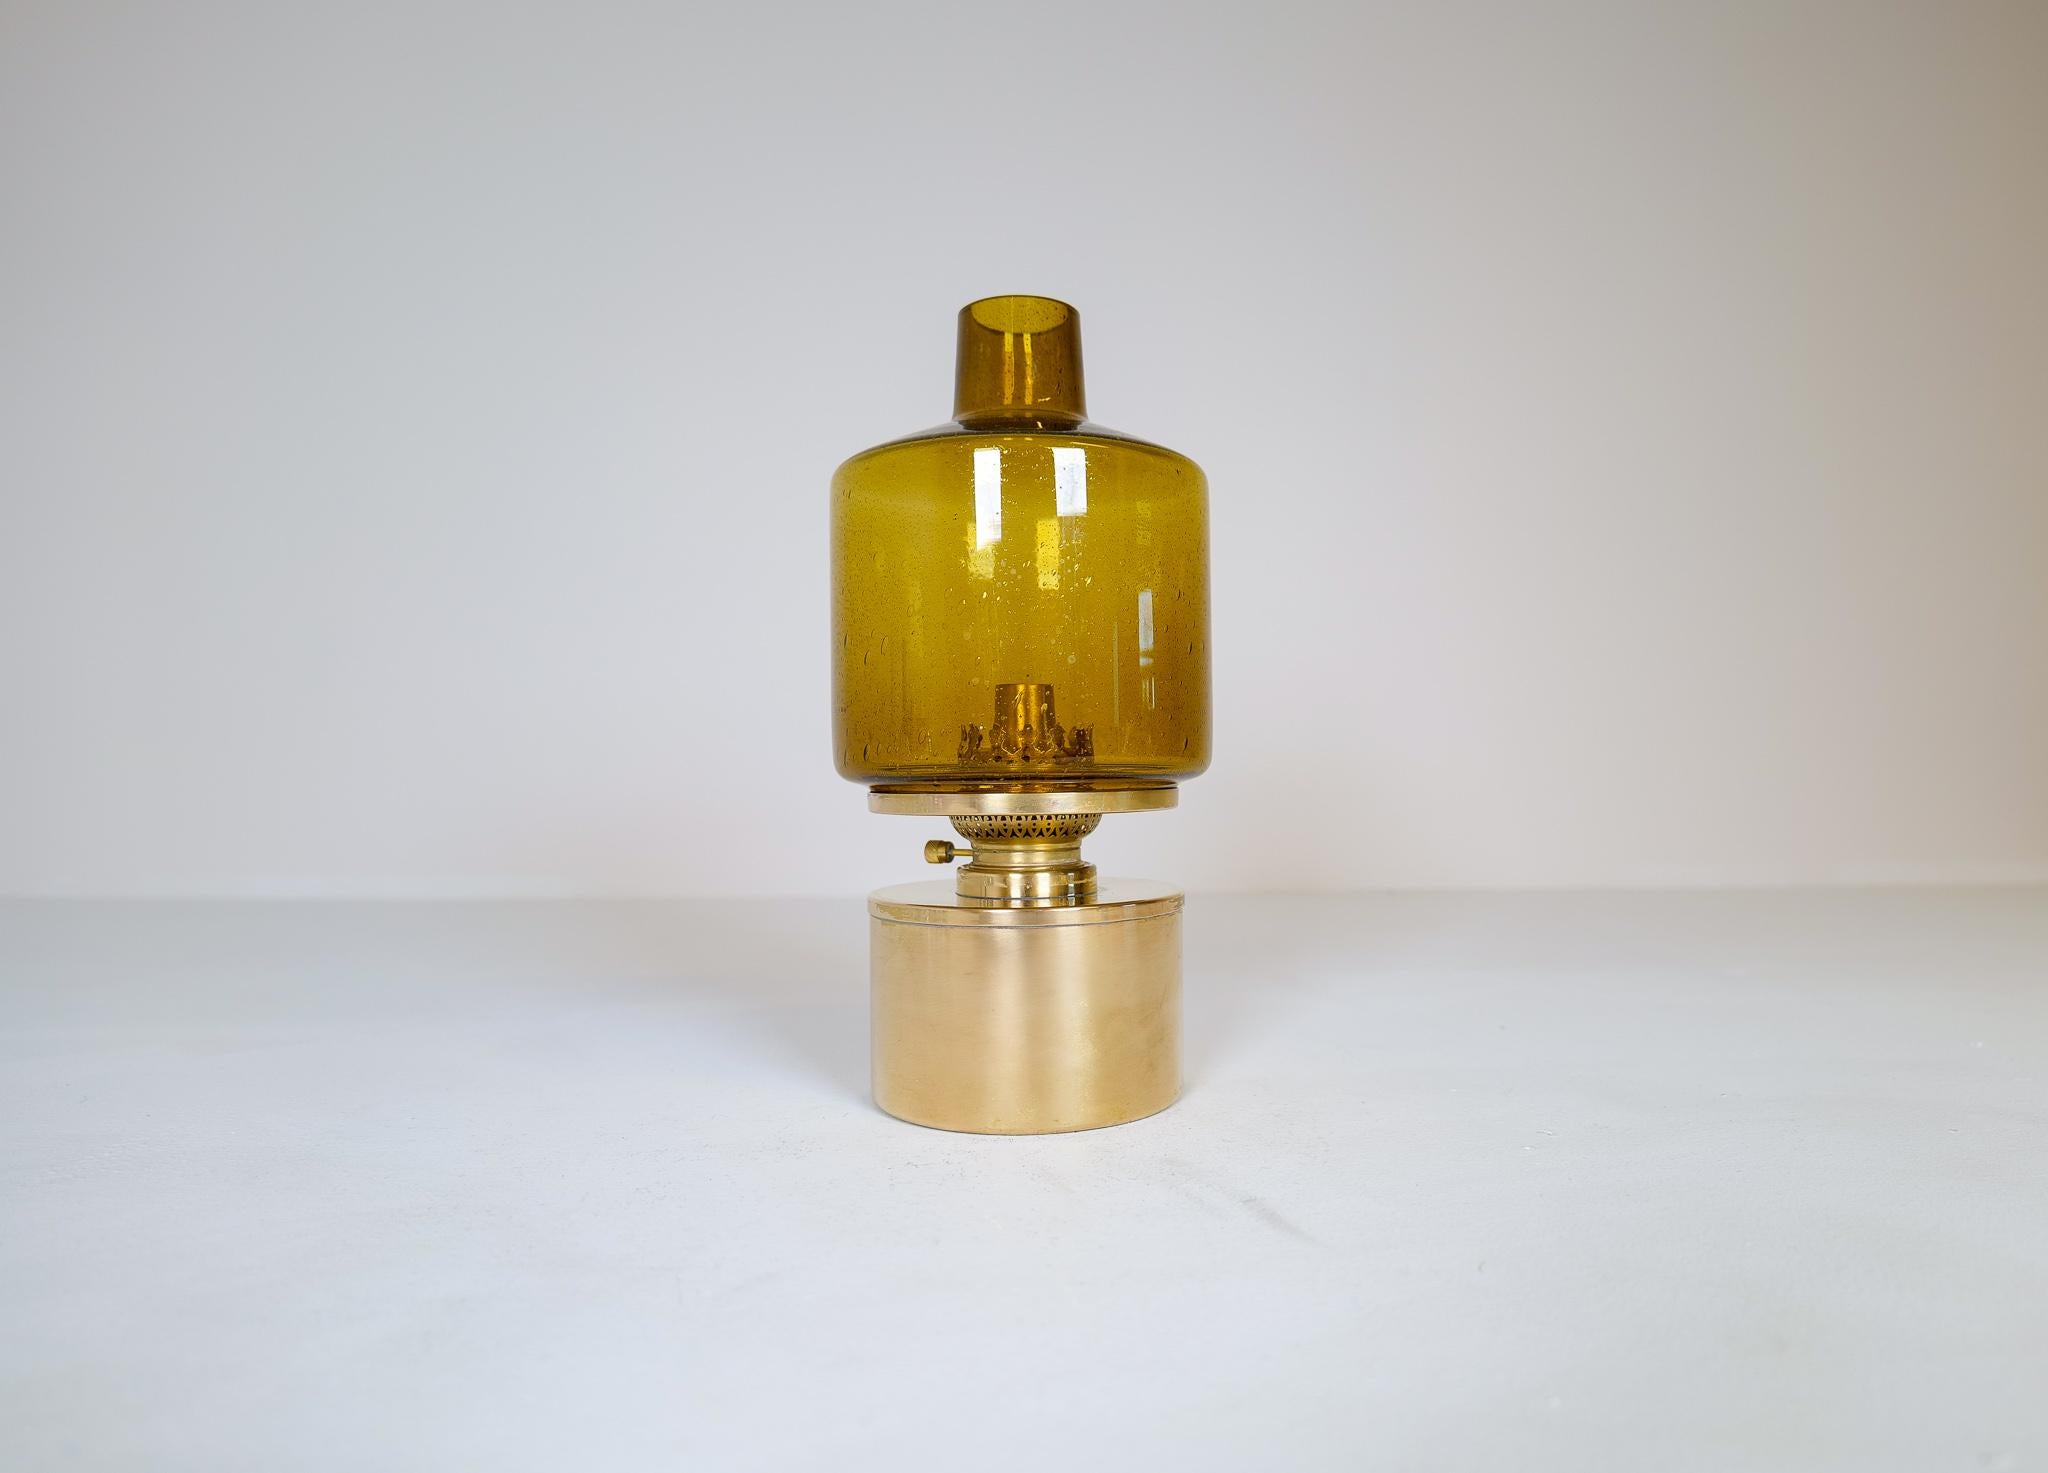 Table lamp model oil lamp model L-47 designed by Hans-Agne Jakobsson. Produced by Hans-Agne Jakobsson in Markaryd, Sweden. Hand blown glass in an amber color. The piece features a base in polished brass with the glass, together it makes a perfect